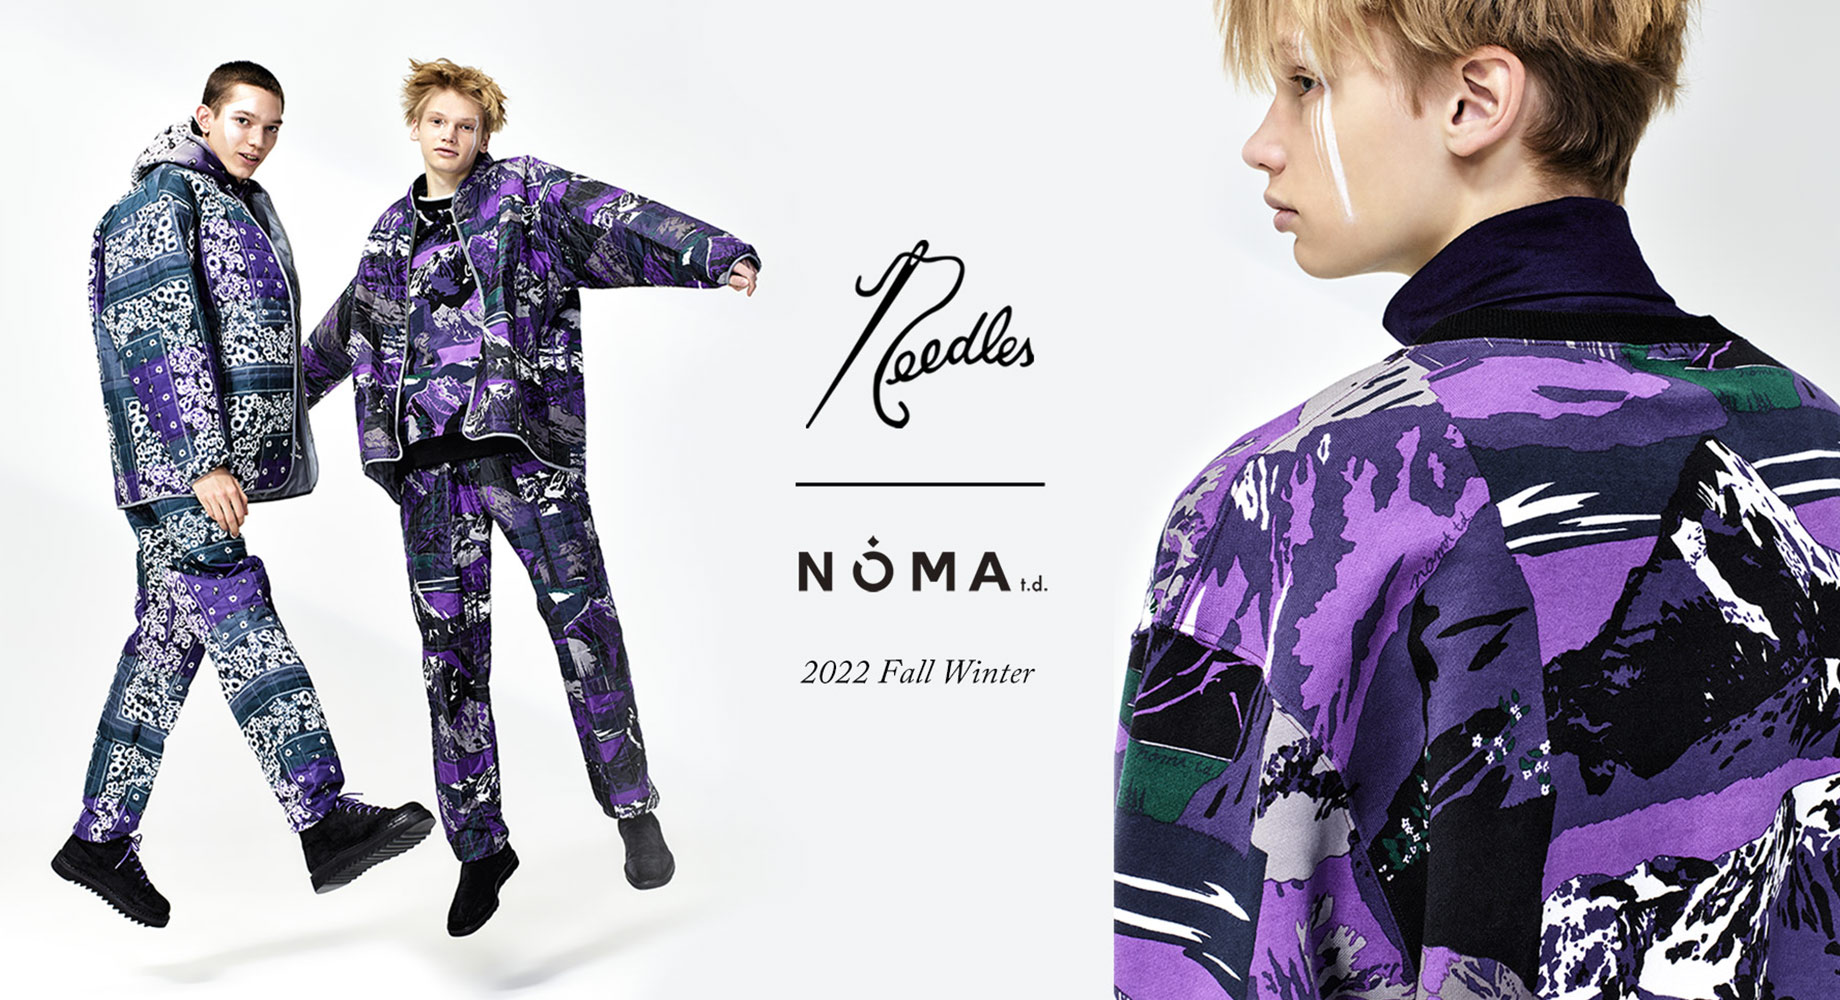 〈NEEDLES〉x〈NOMA t.d.〉COLLABORATION PRODUCTS for NEPENTHES 11.12（SAT）11:00 JST - ON SALE